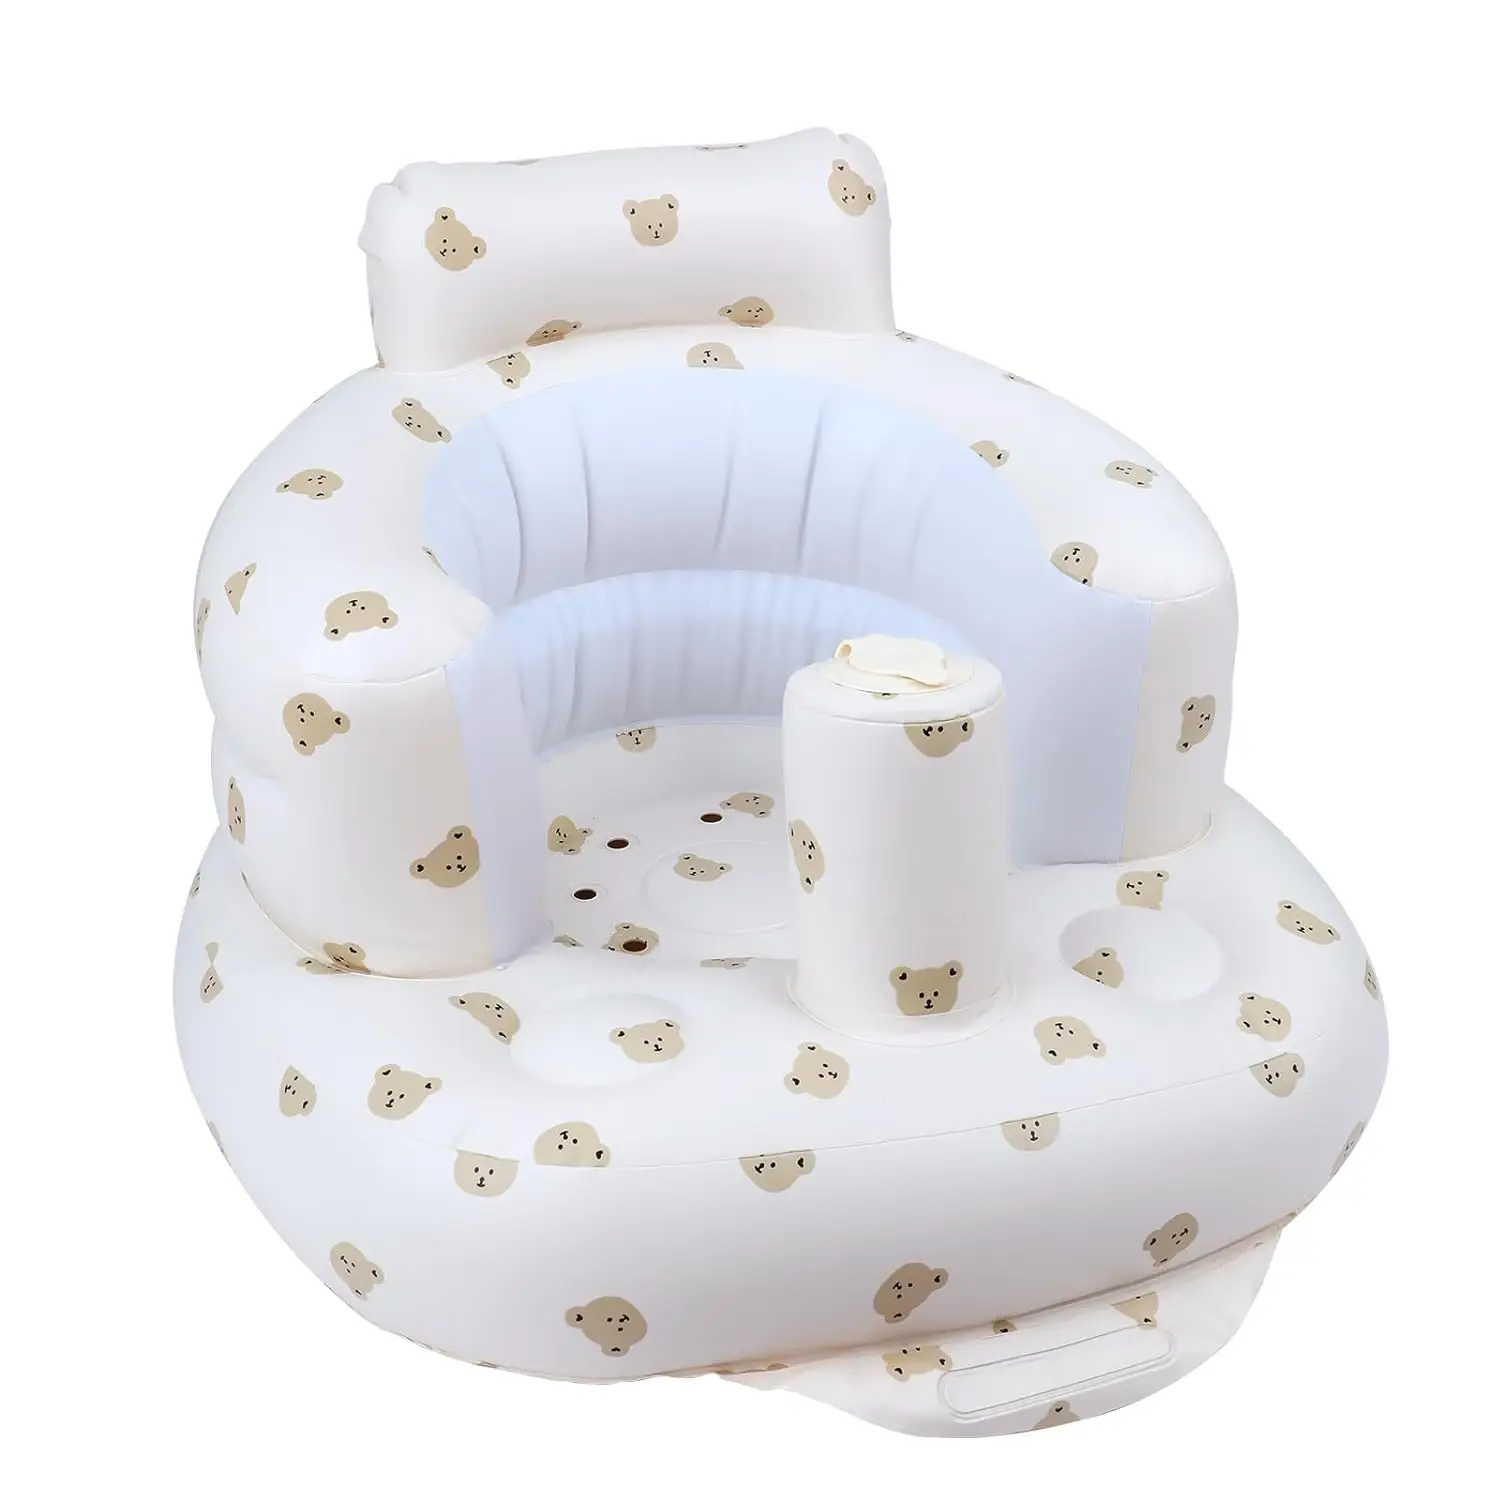 

Baby Inflatable Seat for Babies 3 Months & Up, Baby Floor Seats for Sitting Up with Built in Air Pump, Blow Up Baby Chair